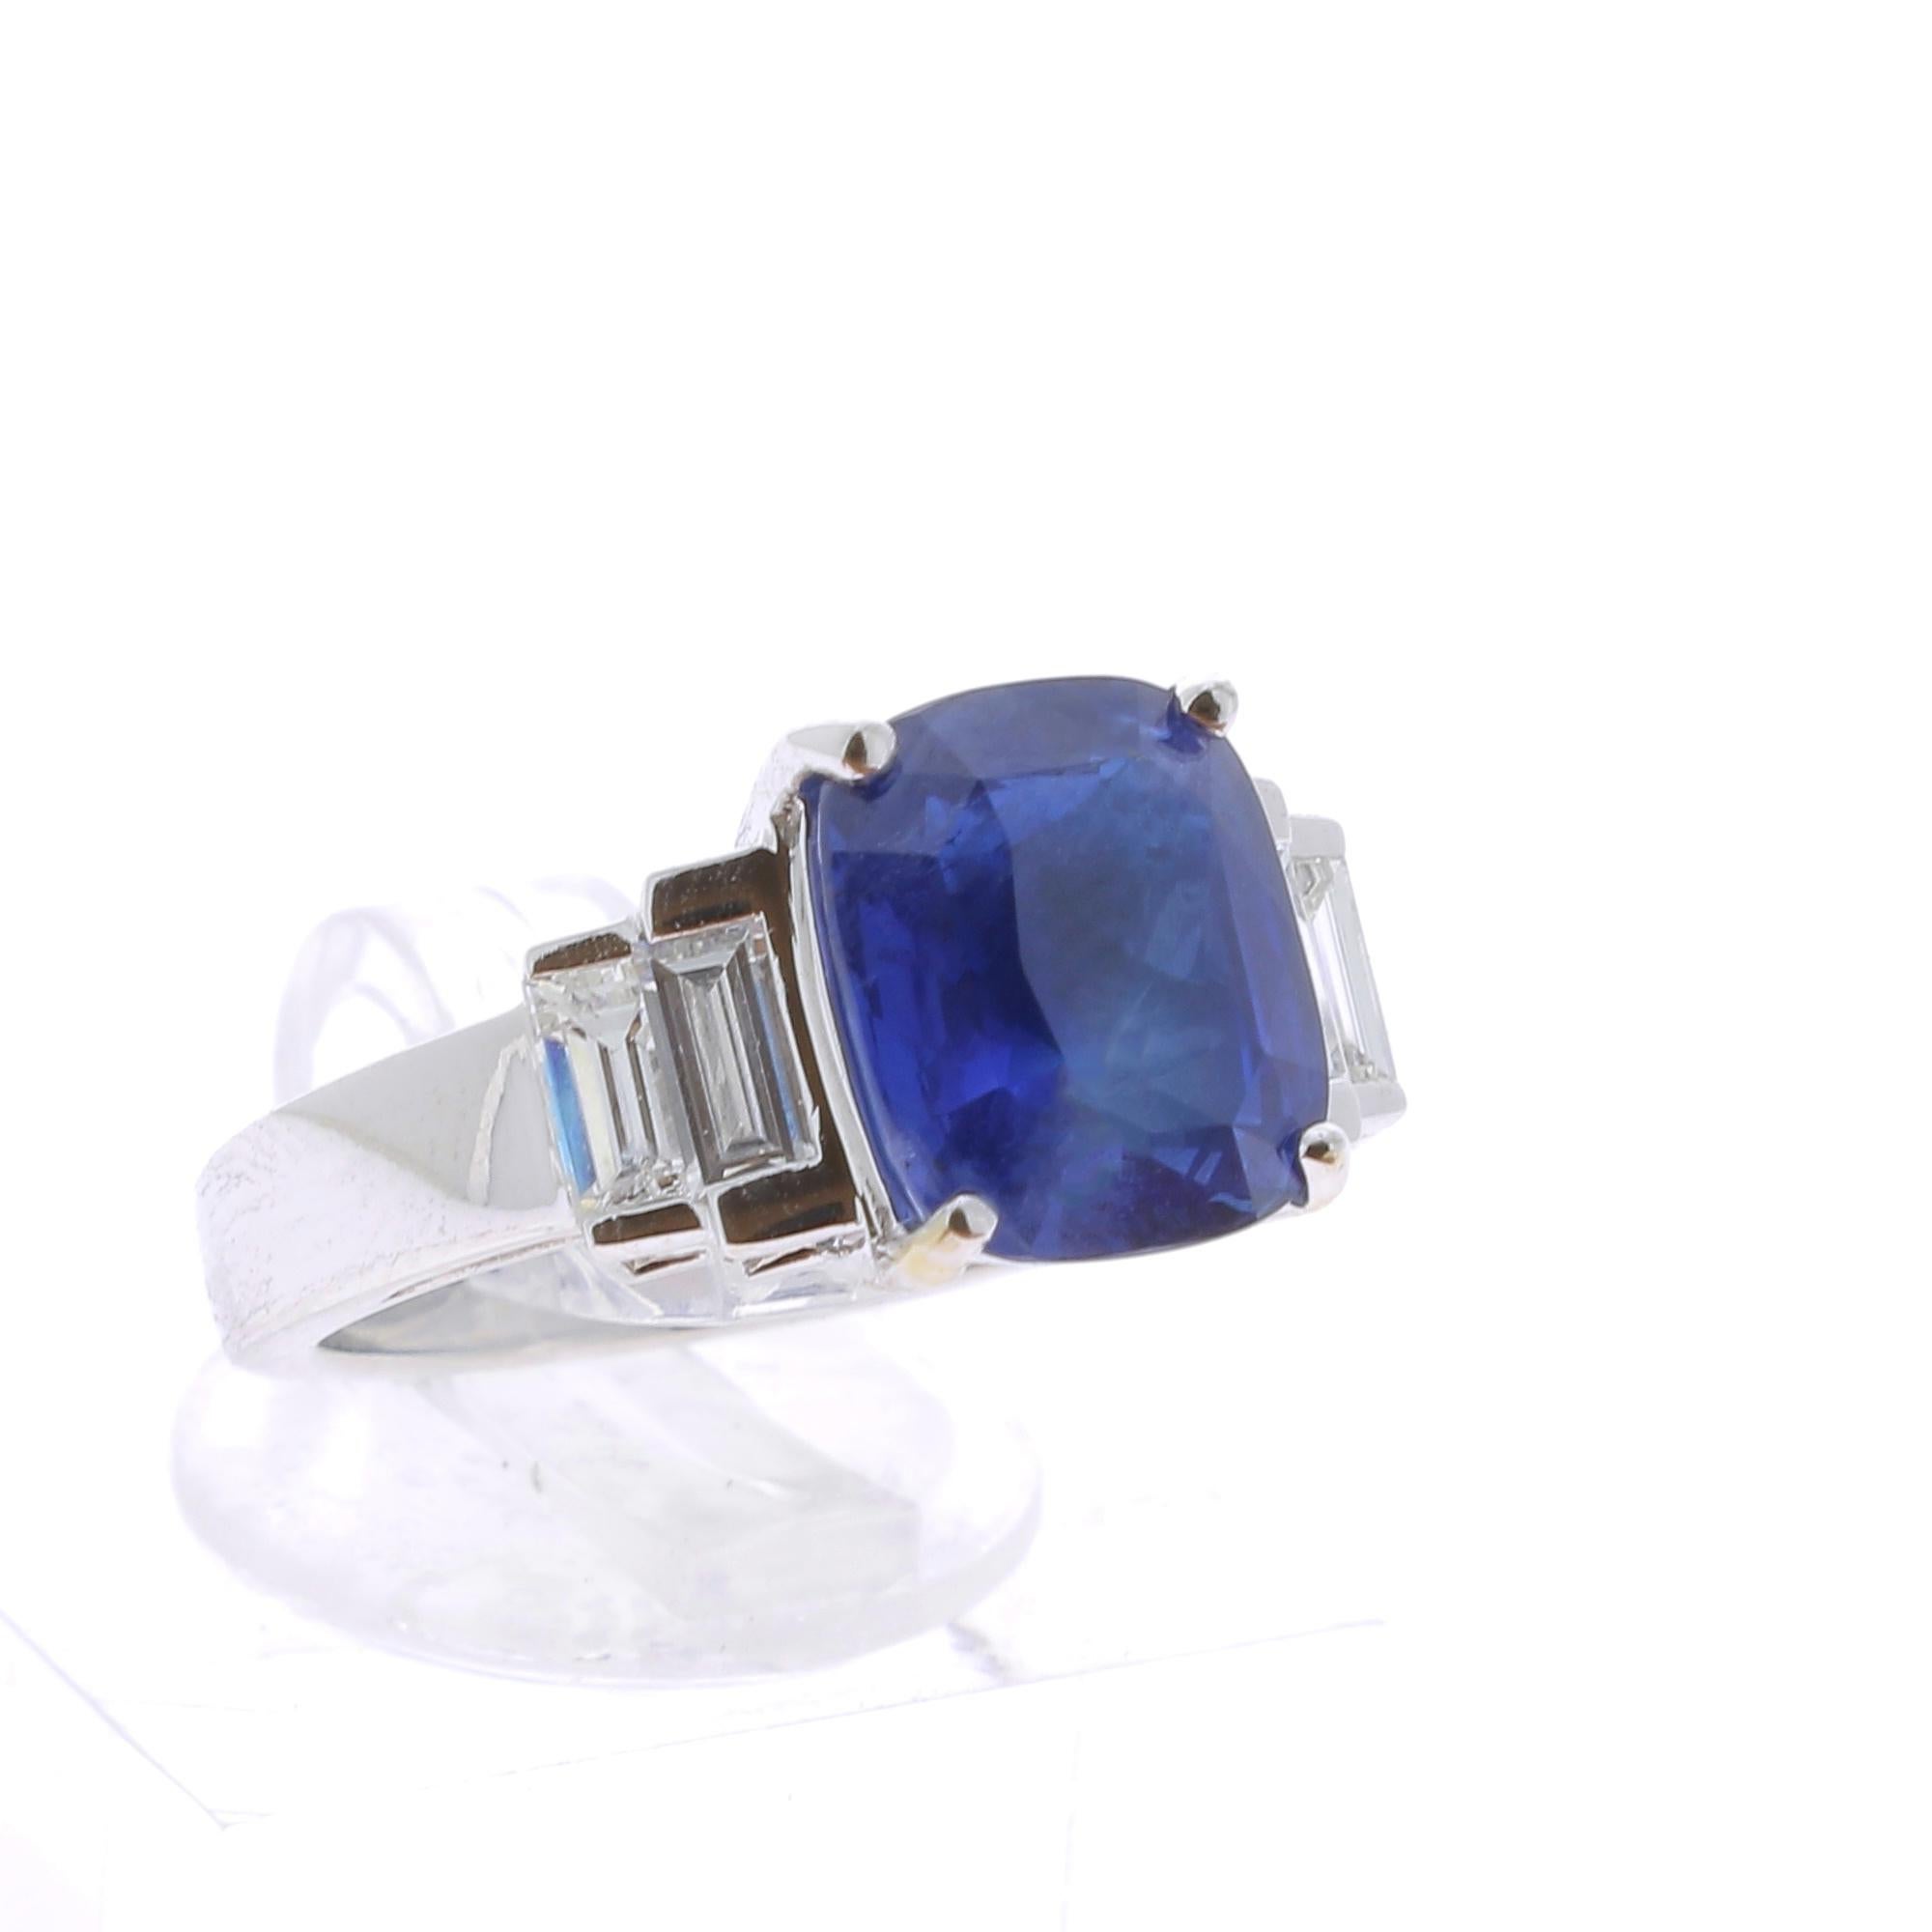 A Ceylon Sapphire Ring, flanked on each side by 2 Baguette Diamond.
The total weight of the Sri Lanka Sapphire 